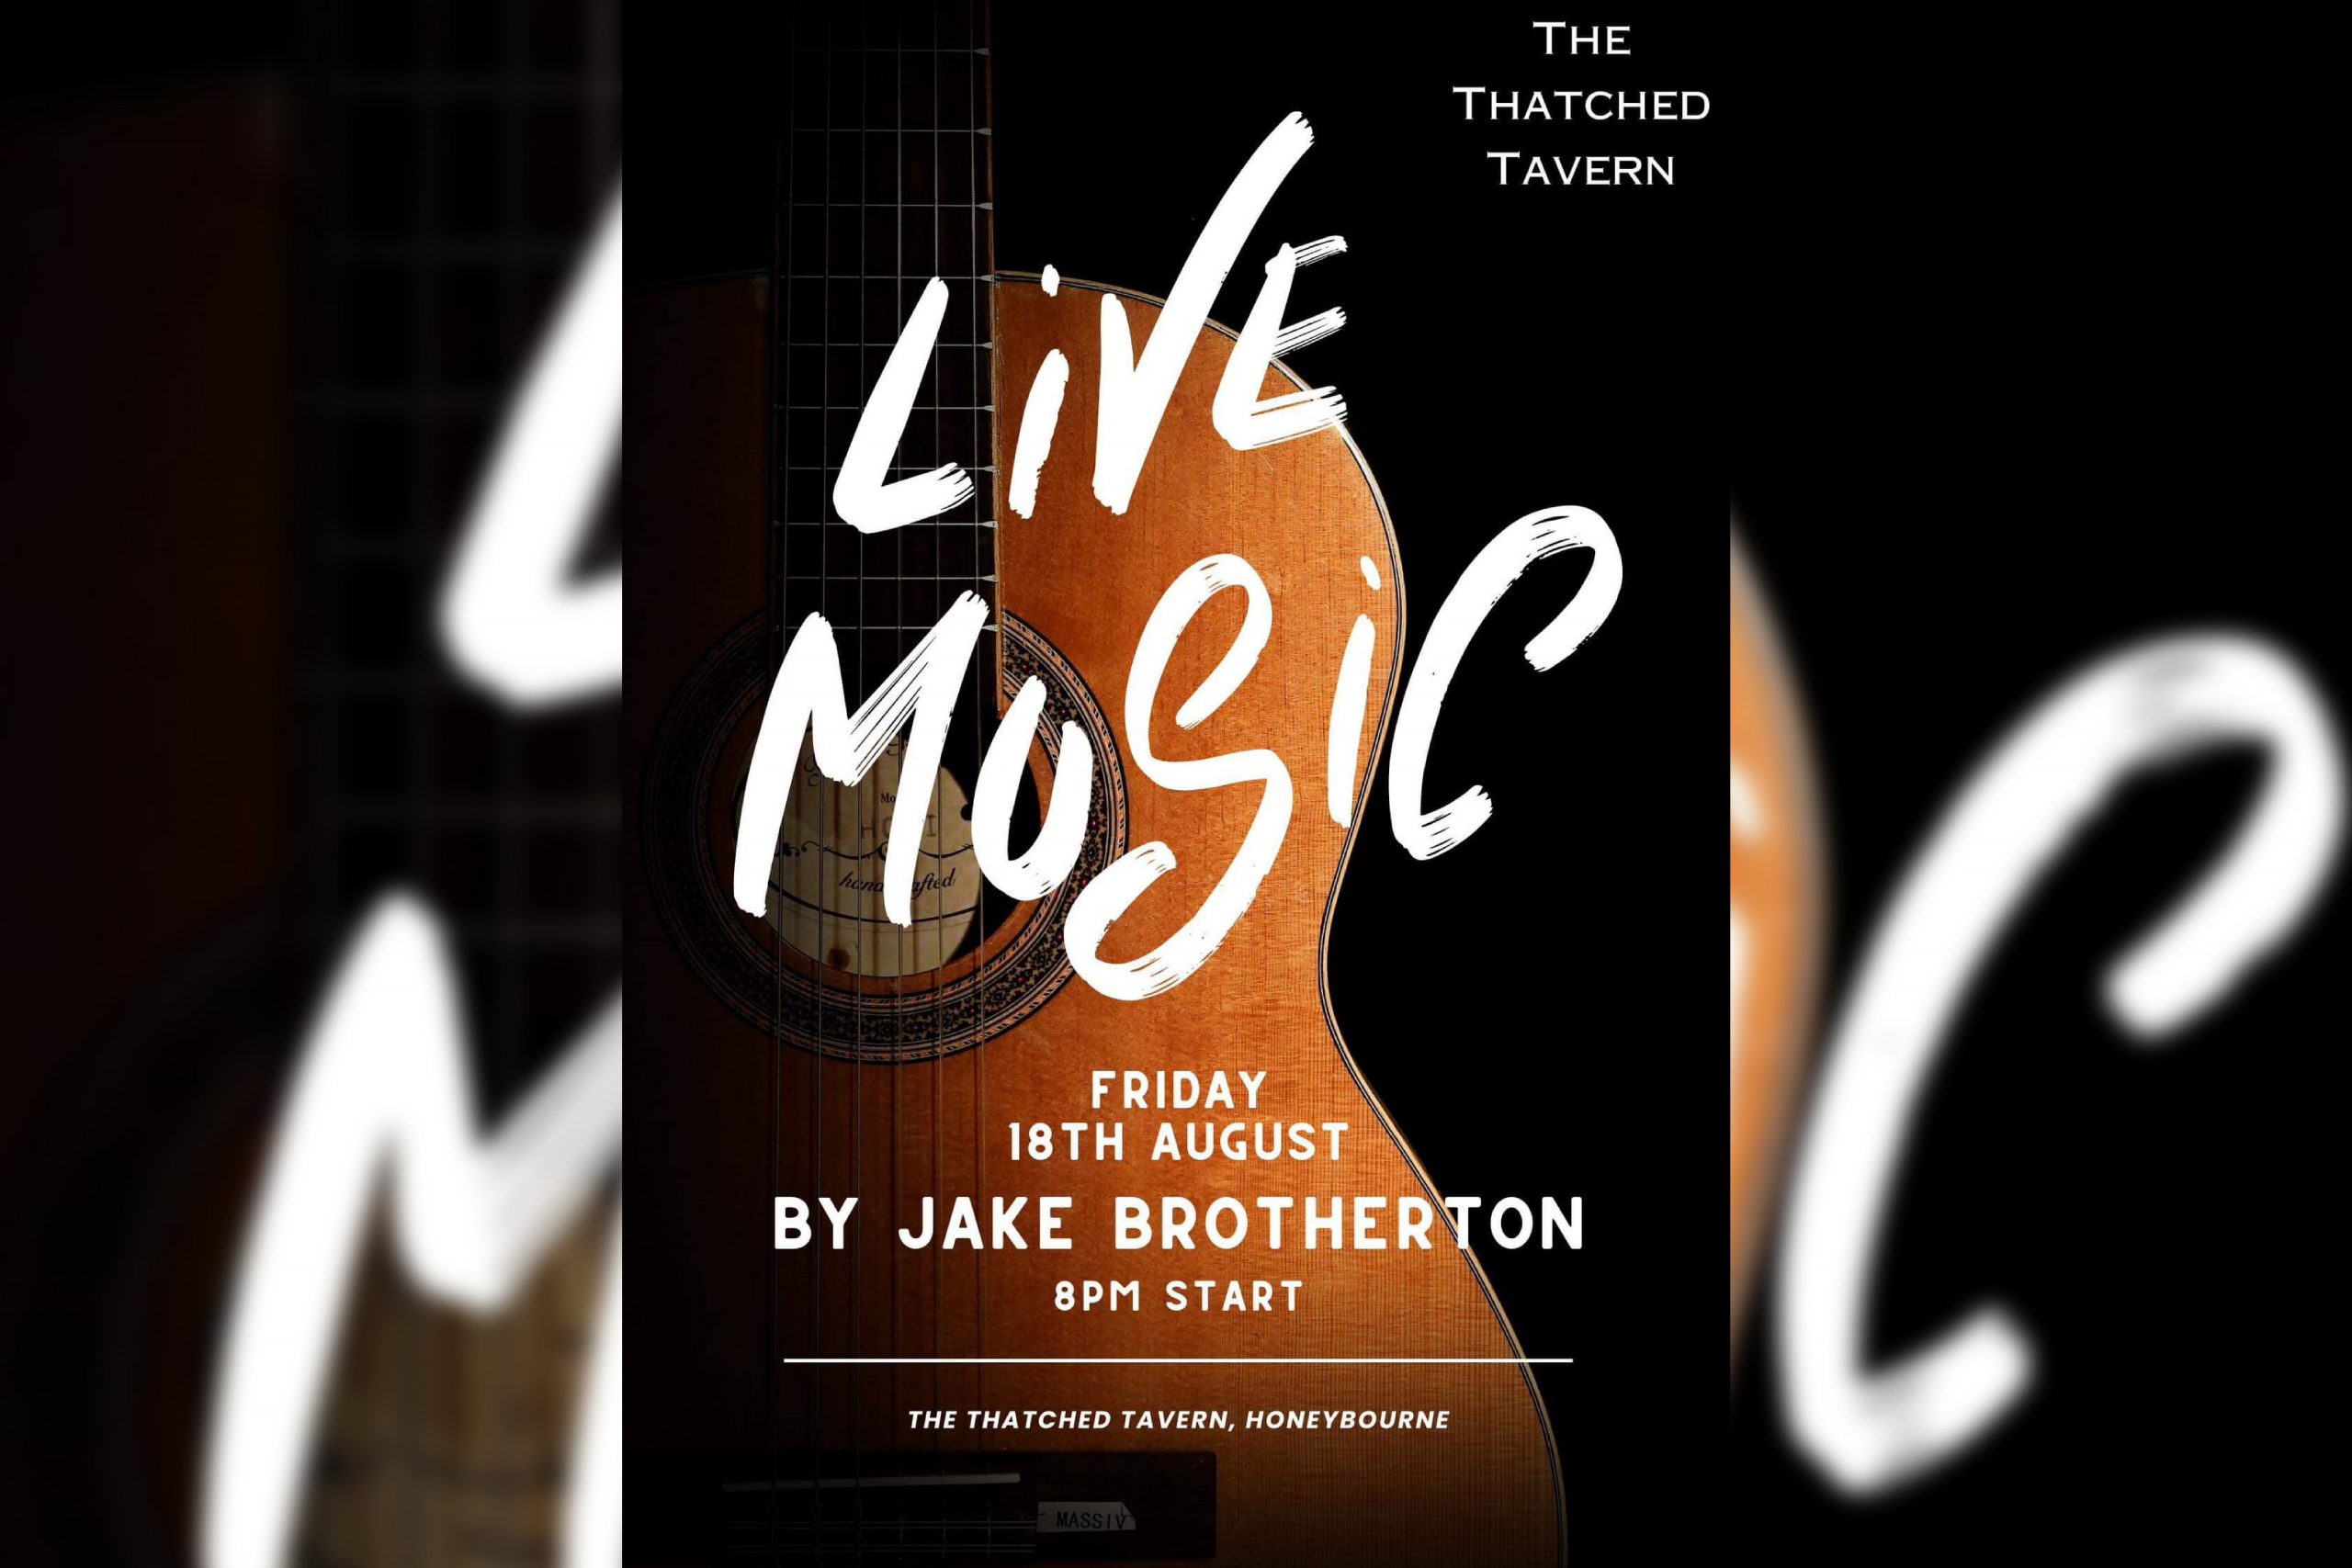 Live music performed by the amazing Jake Brotherton at The Thatched Tavern Pub in Honeybourne - Friday 18th August from 8.00pm. Come and joins us for an amazing night of entertainment and warm vibes.